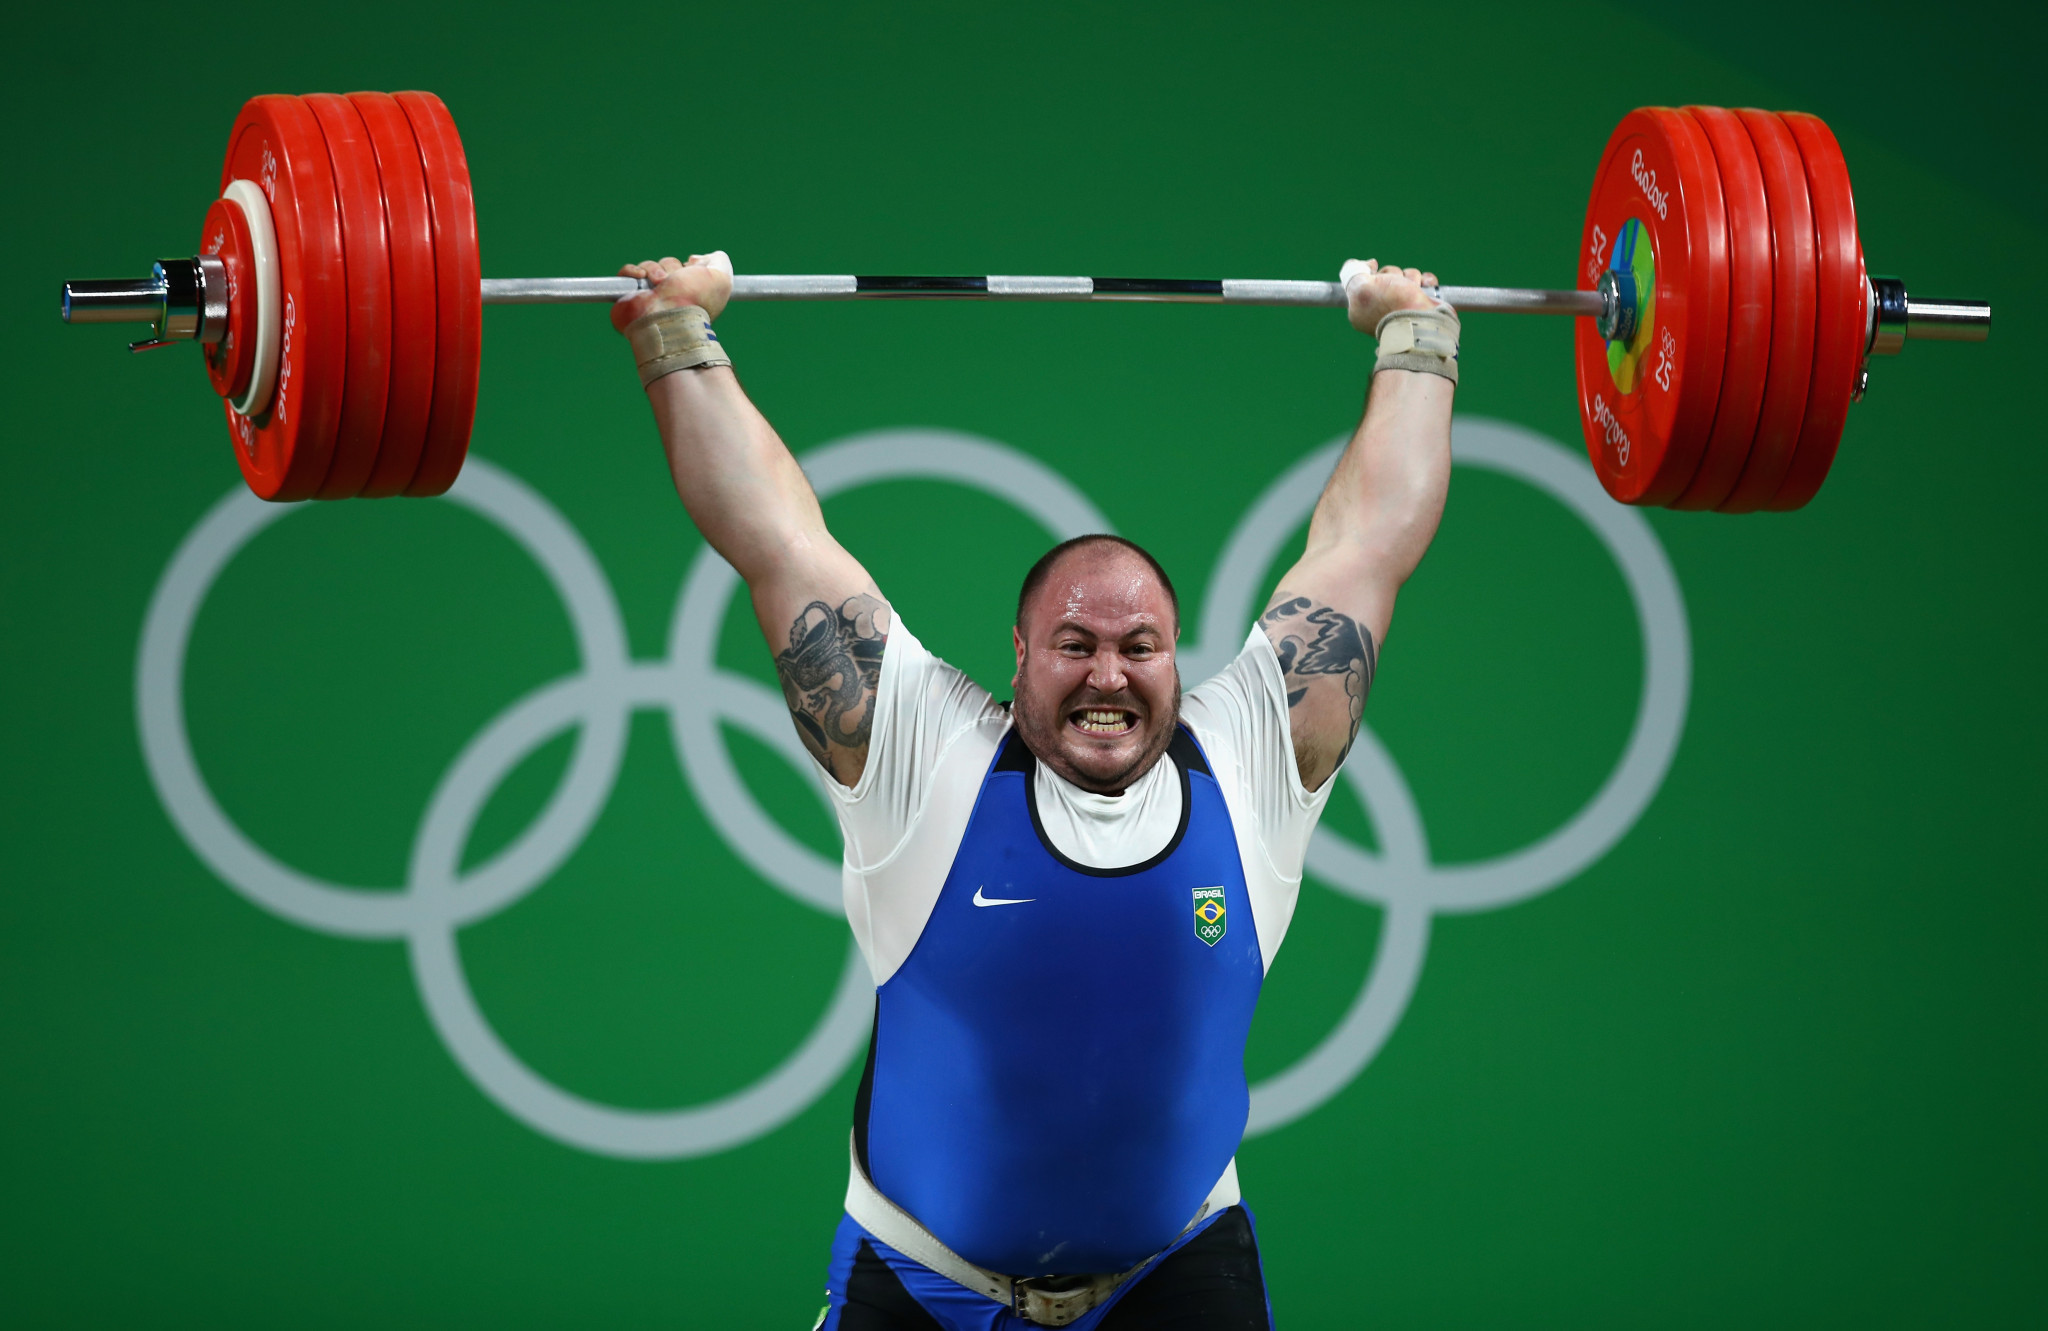 Fernando Reis won the men's super heavyweight category at the Pan American Championships in Santo Domingo ©Getty Images